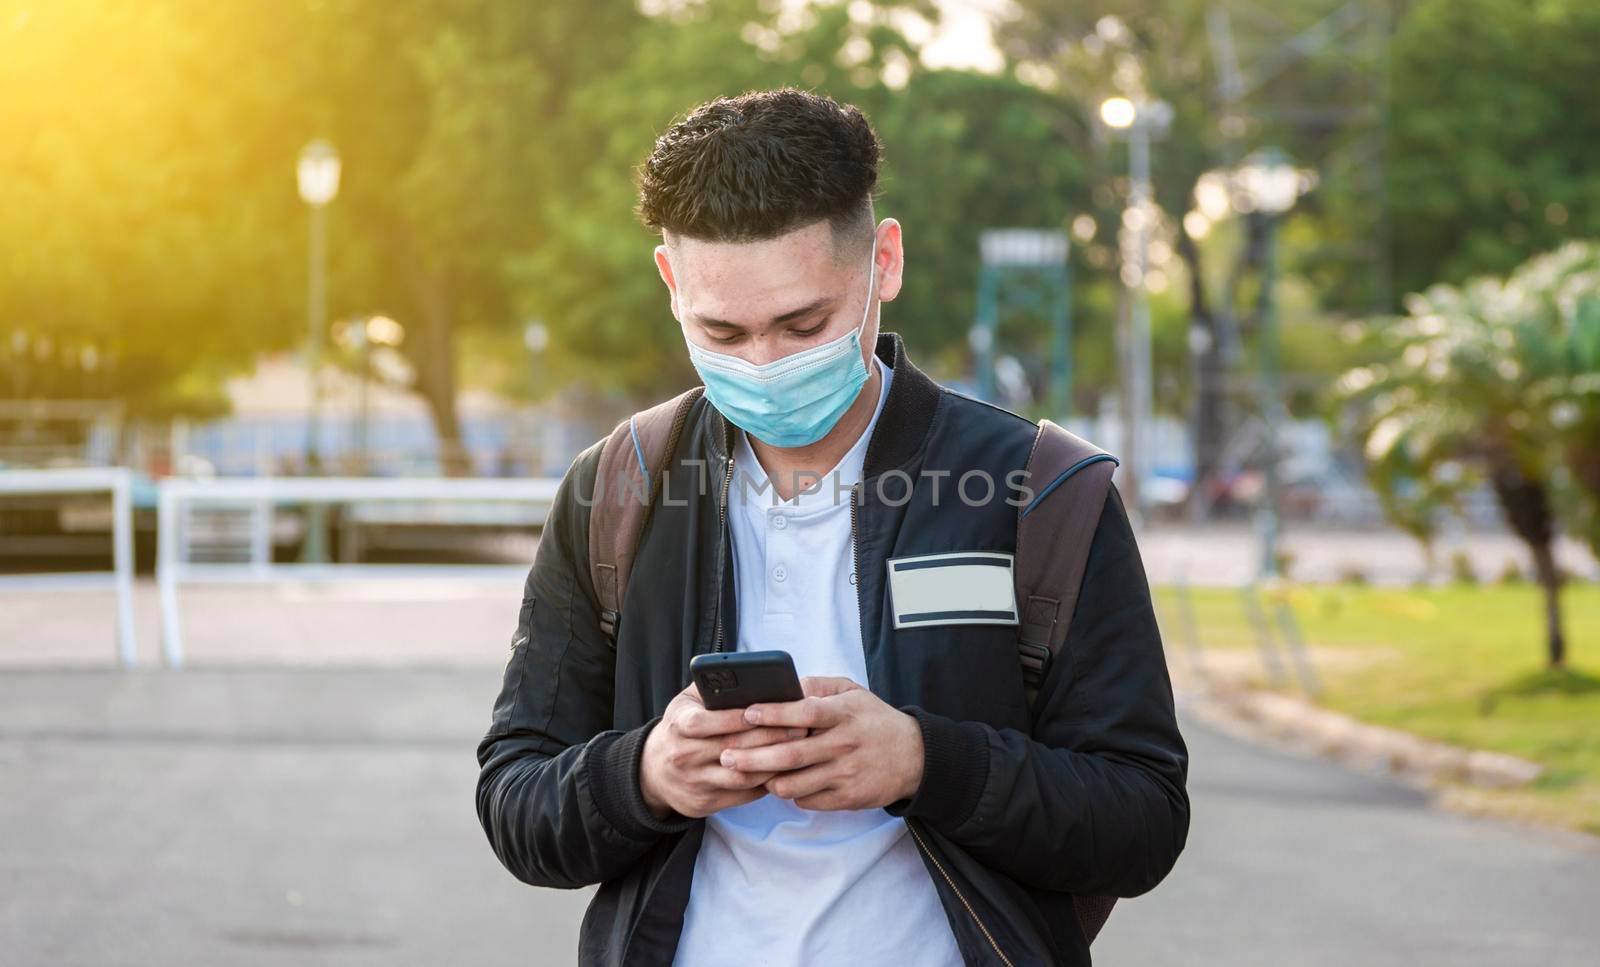 Handsome guy texting with his phone, Handsome young man in face mask texting with his phone, Handsome man texting on his phone by isaiphoto